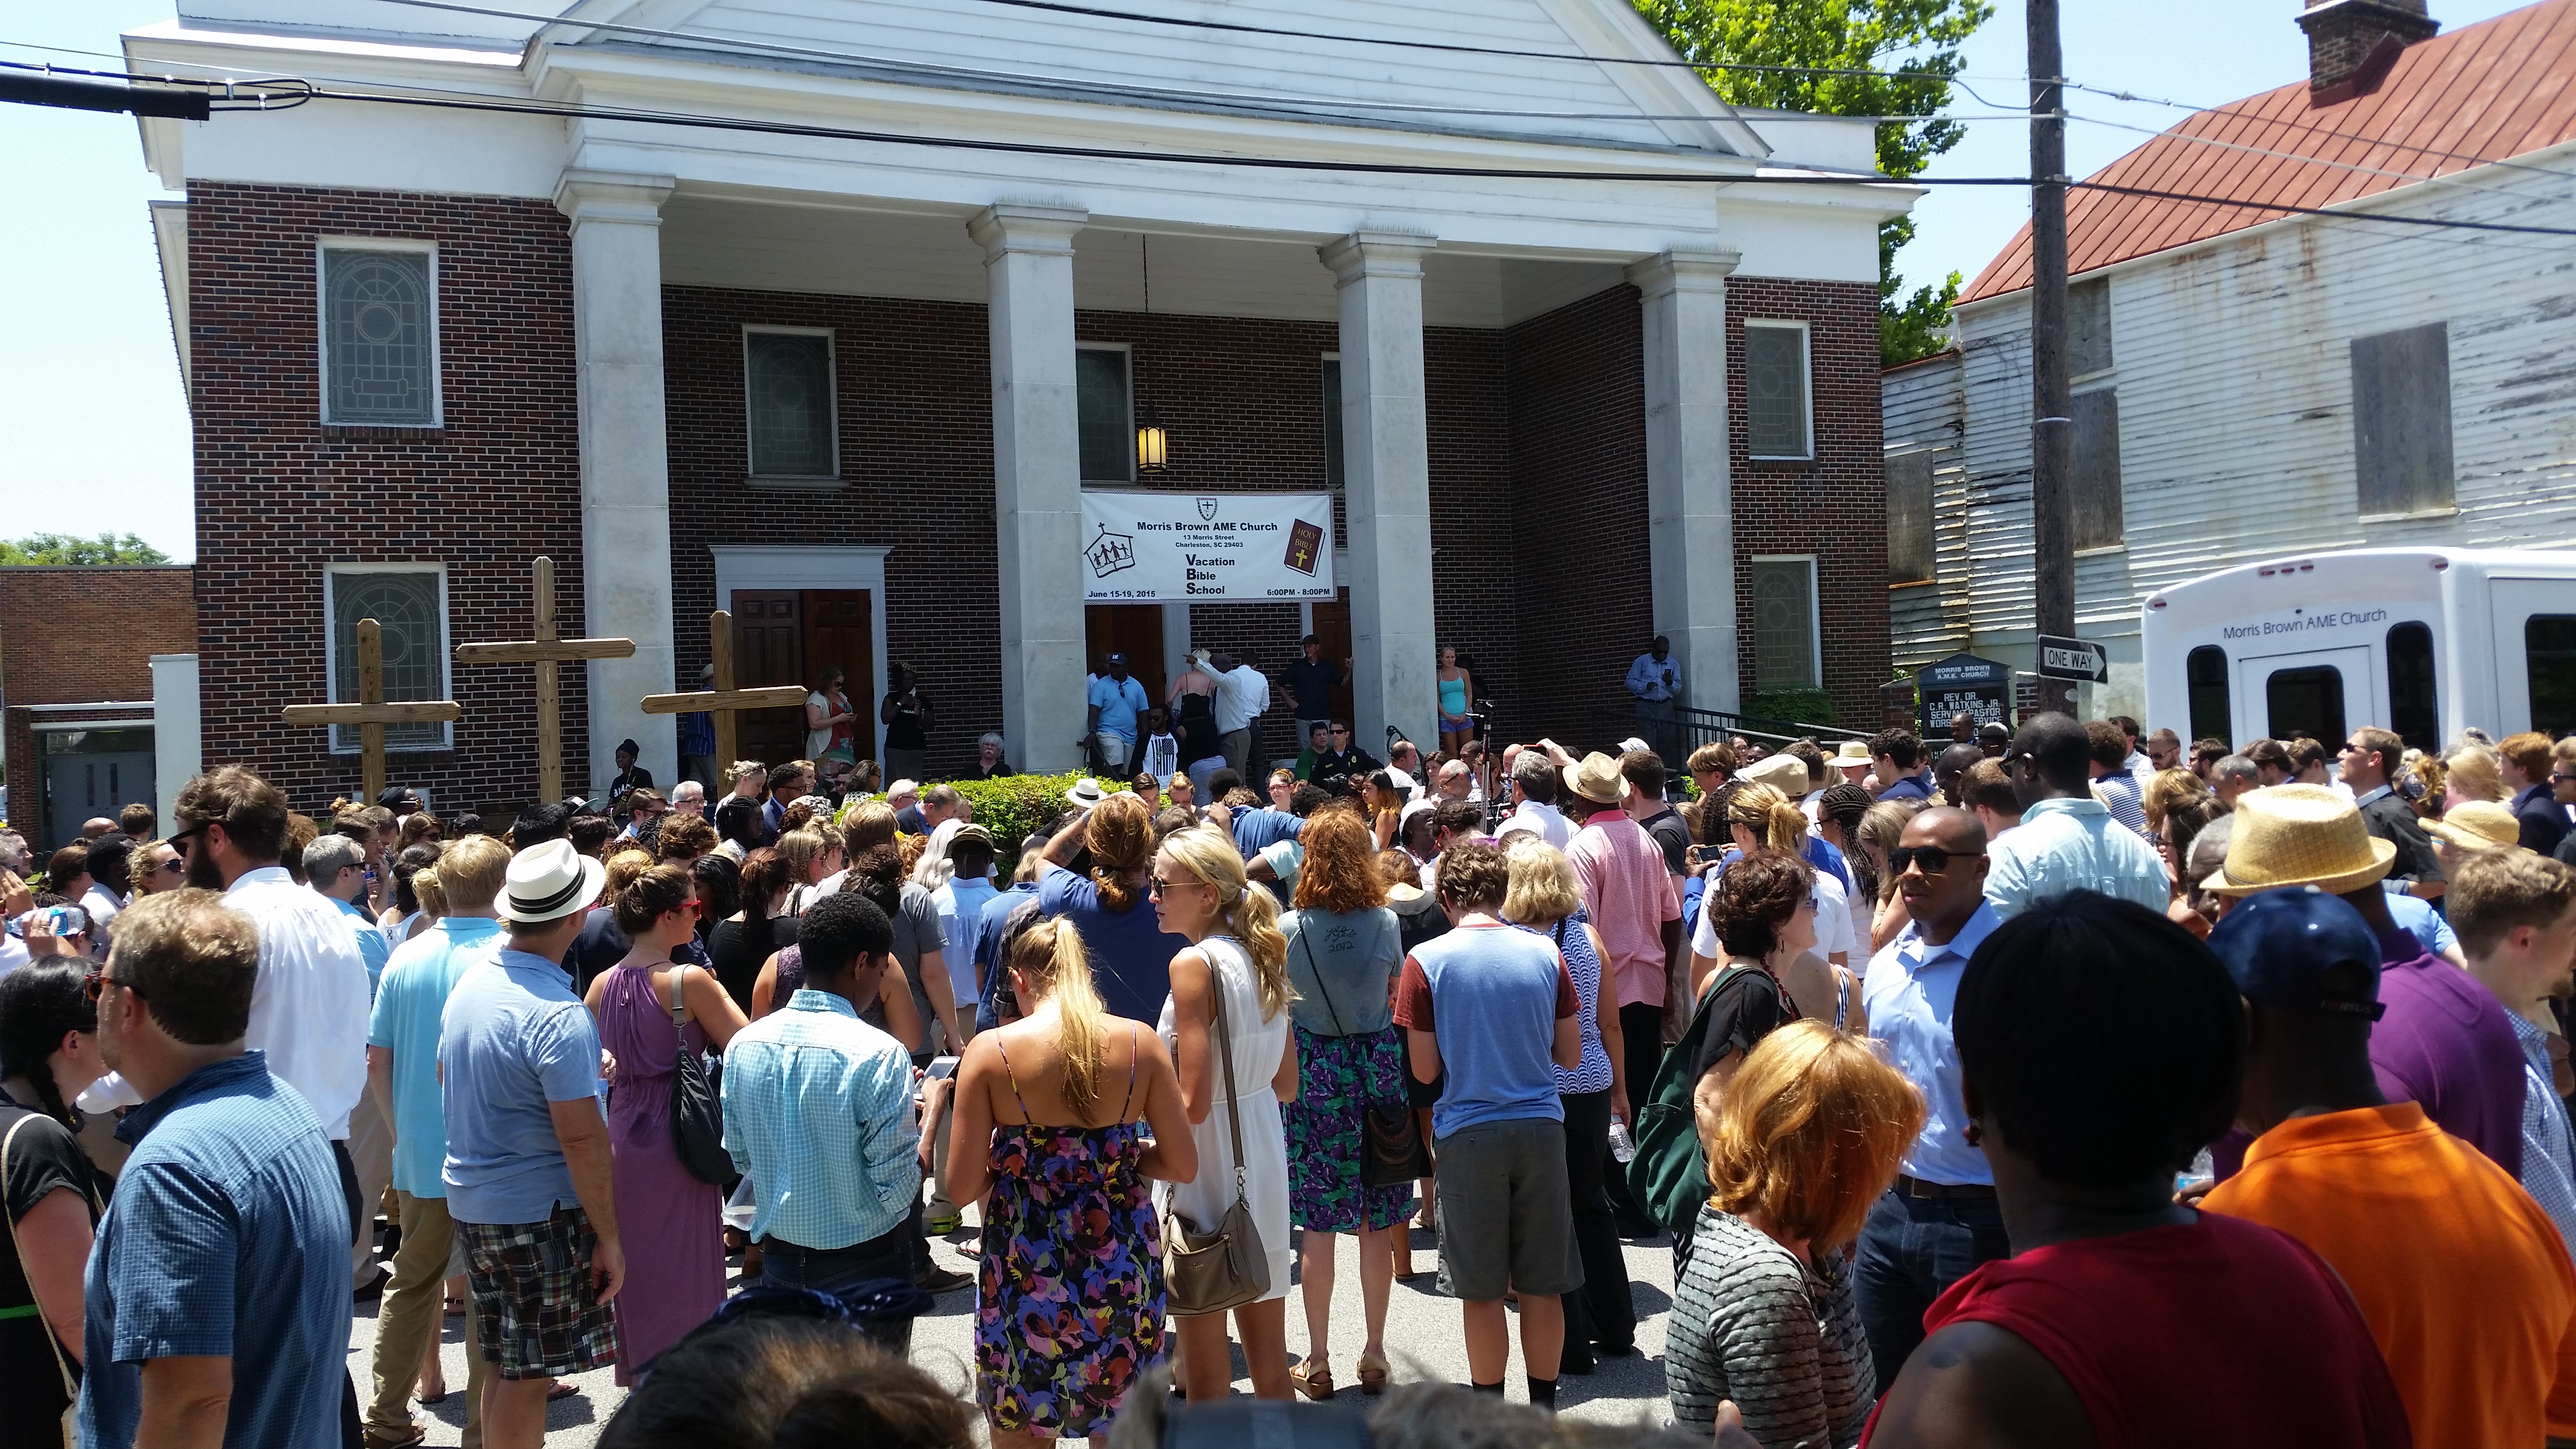 A memorial service on June 18 for the victims of the Charleston shooting. | <a href="https://commons.wikimedia.org/wiki/File%3ACharleston_Shooting_Memorial_Service.jpg">Supplied by Nomader [CC BY-SA 3.0 (http://creativecommons.org/licenses/by-sa/3.0)], via Wikimedia Commons